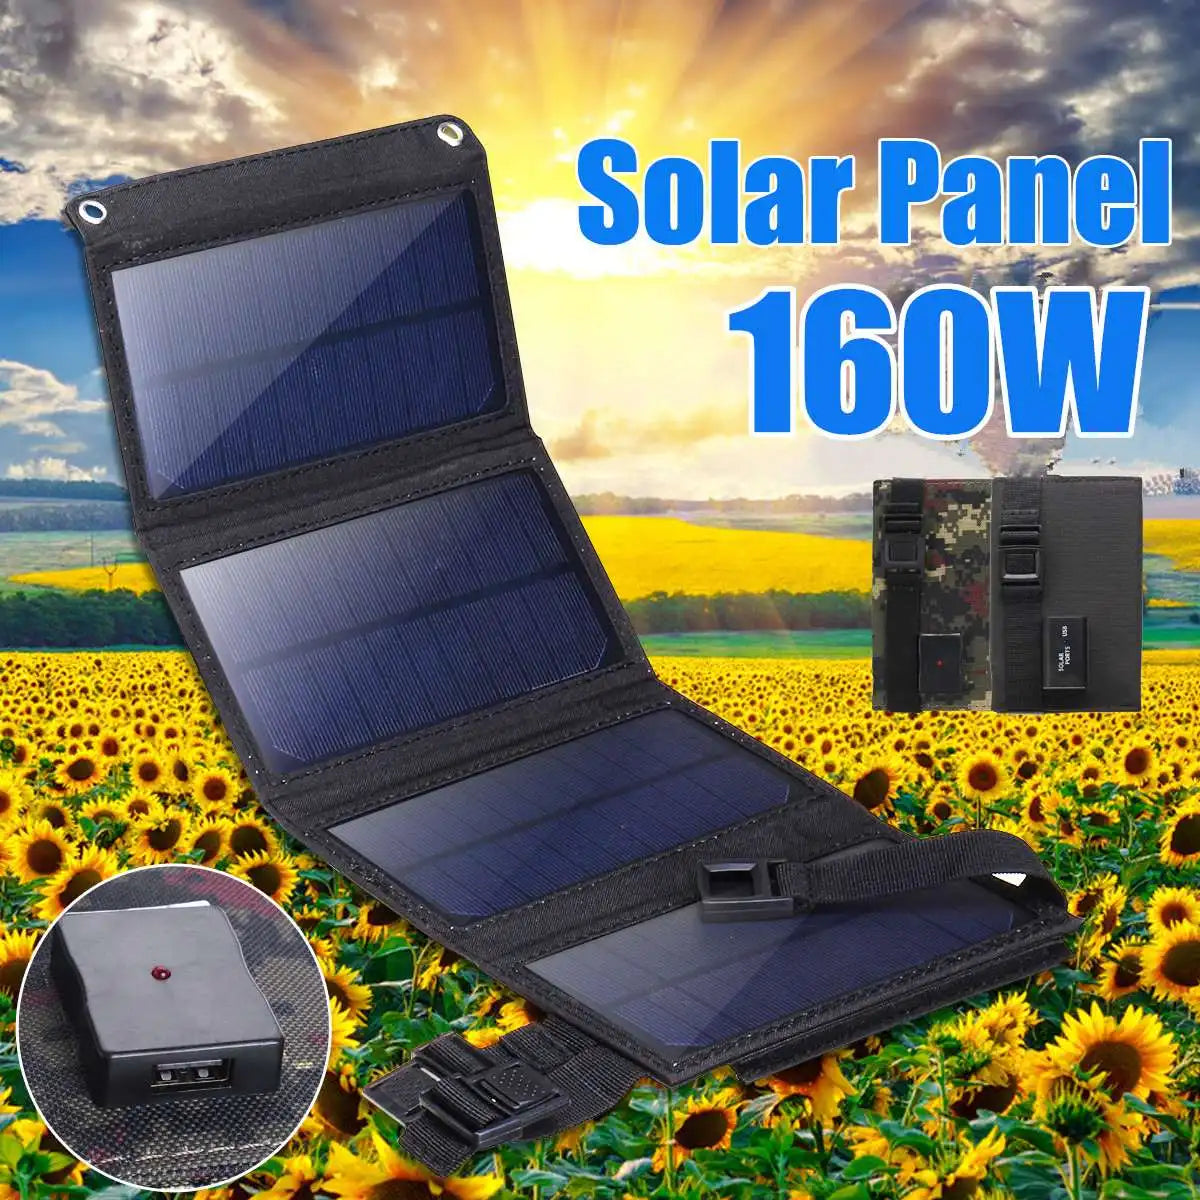 160W Foldable Solar Panel, Perfect for outdoor adventures, emergencies, or work, this solar charger keeps your devices powered up.